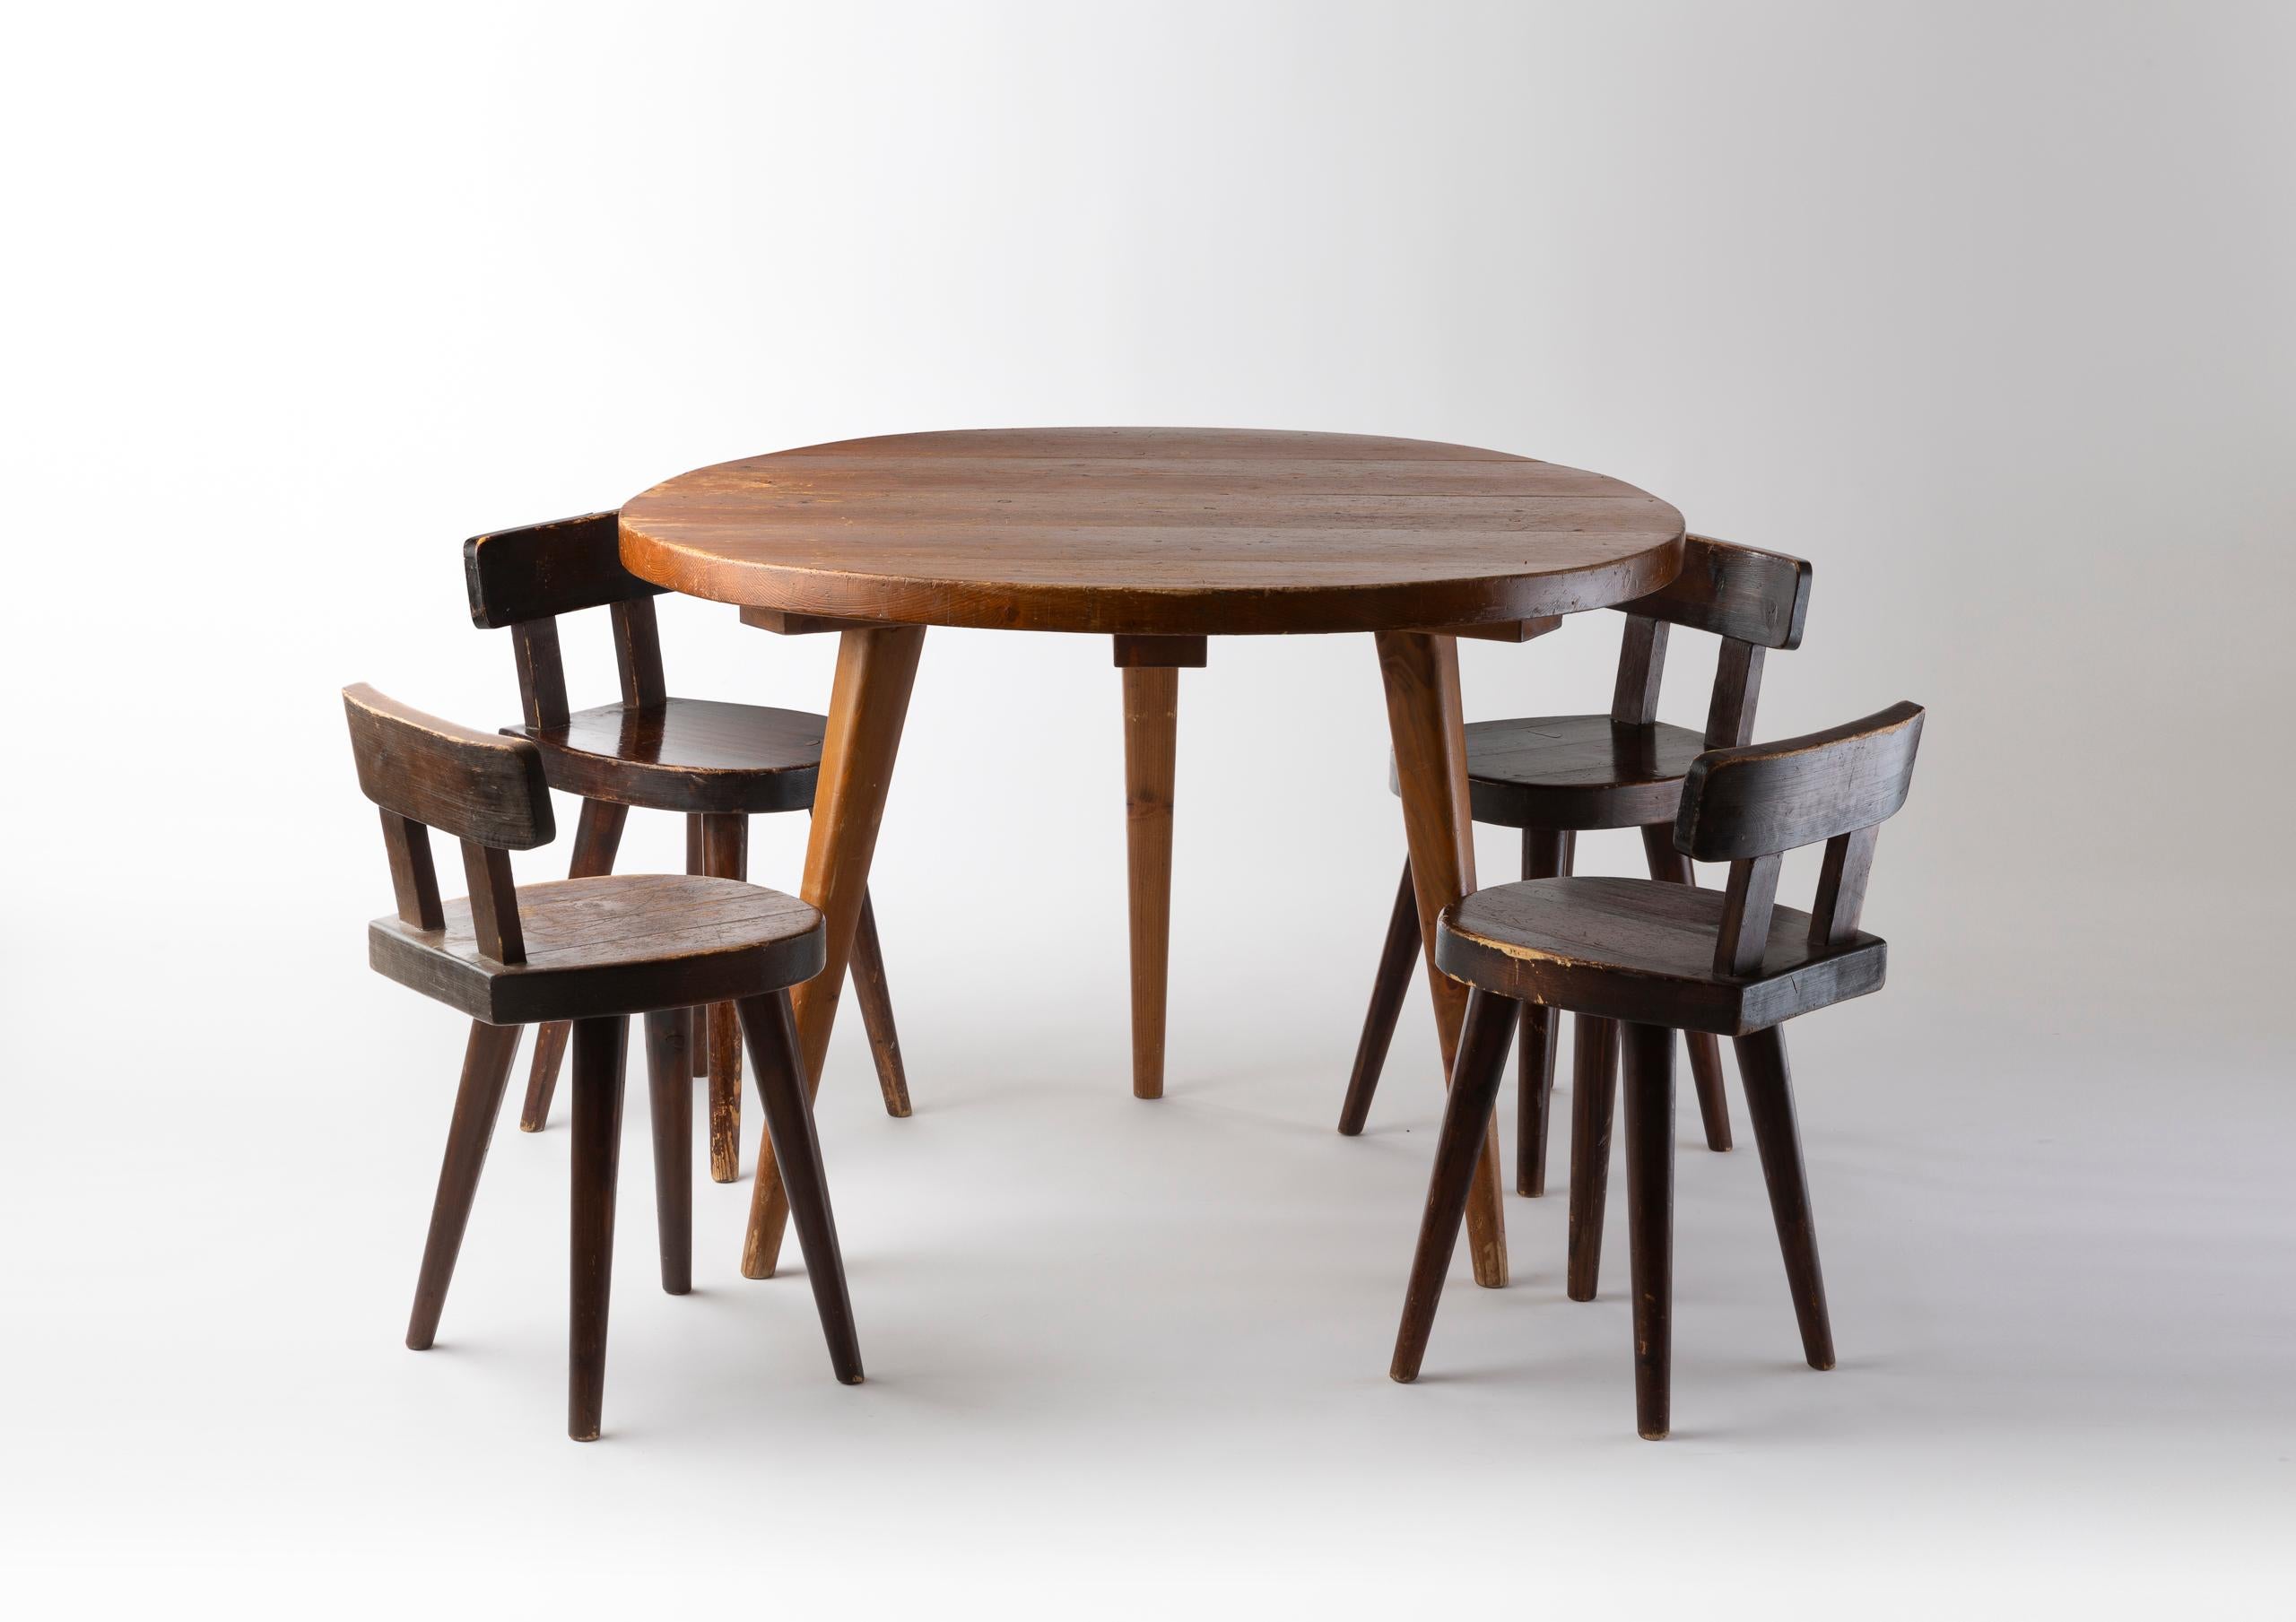 Christian Durupt Meribel Dining Set, Fours Chairs and One Circular Table In Good Condition For Sale In Lille, Hauts-de-France